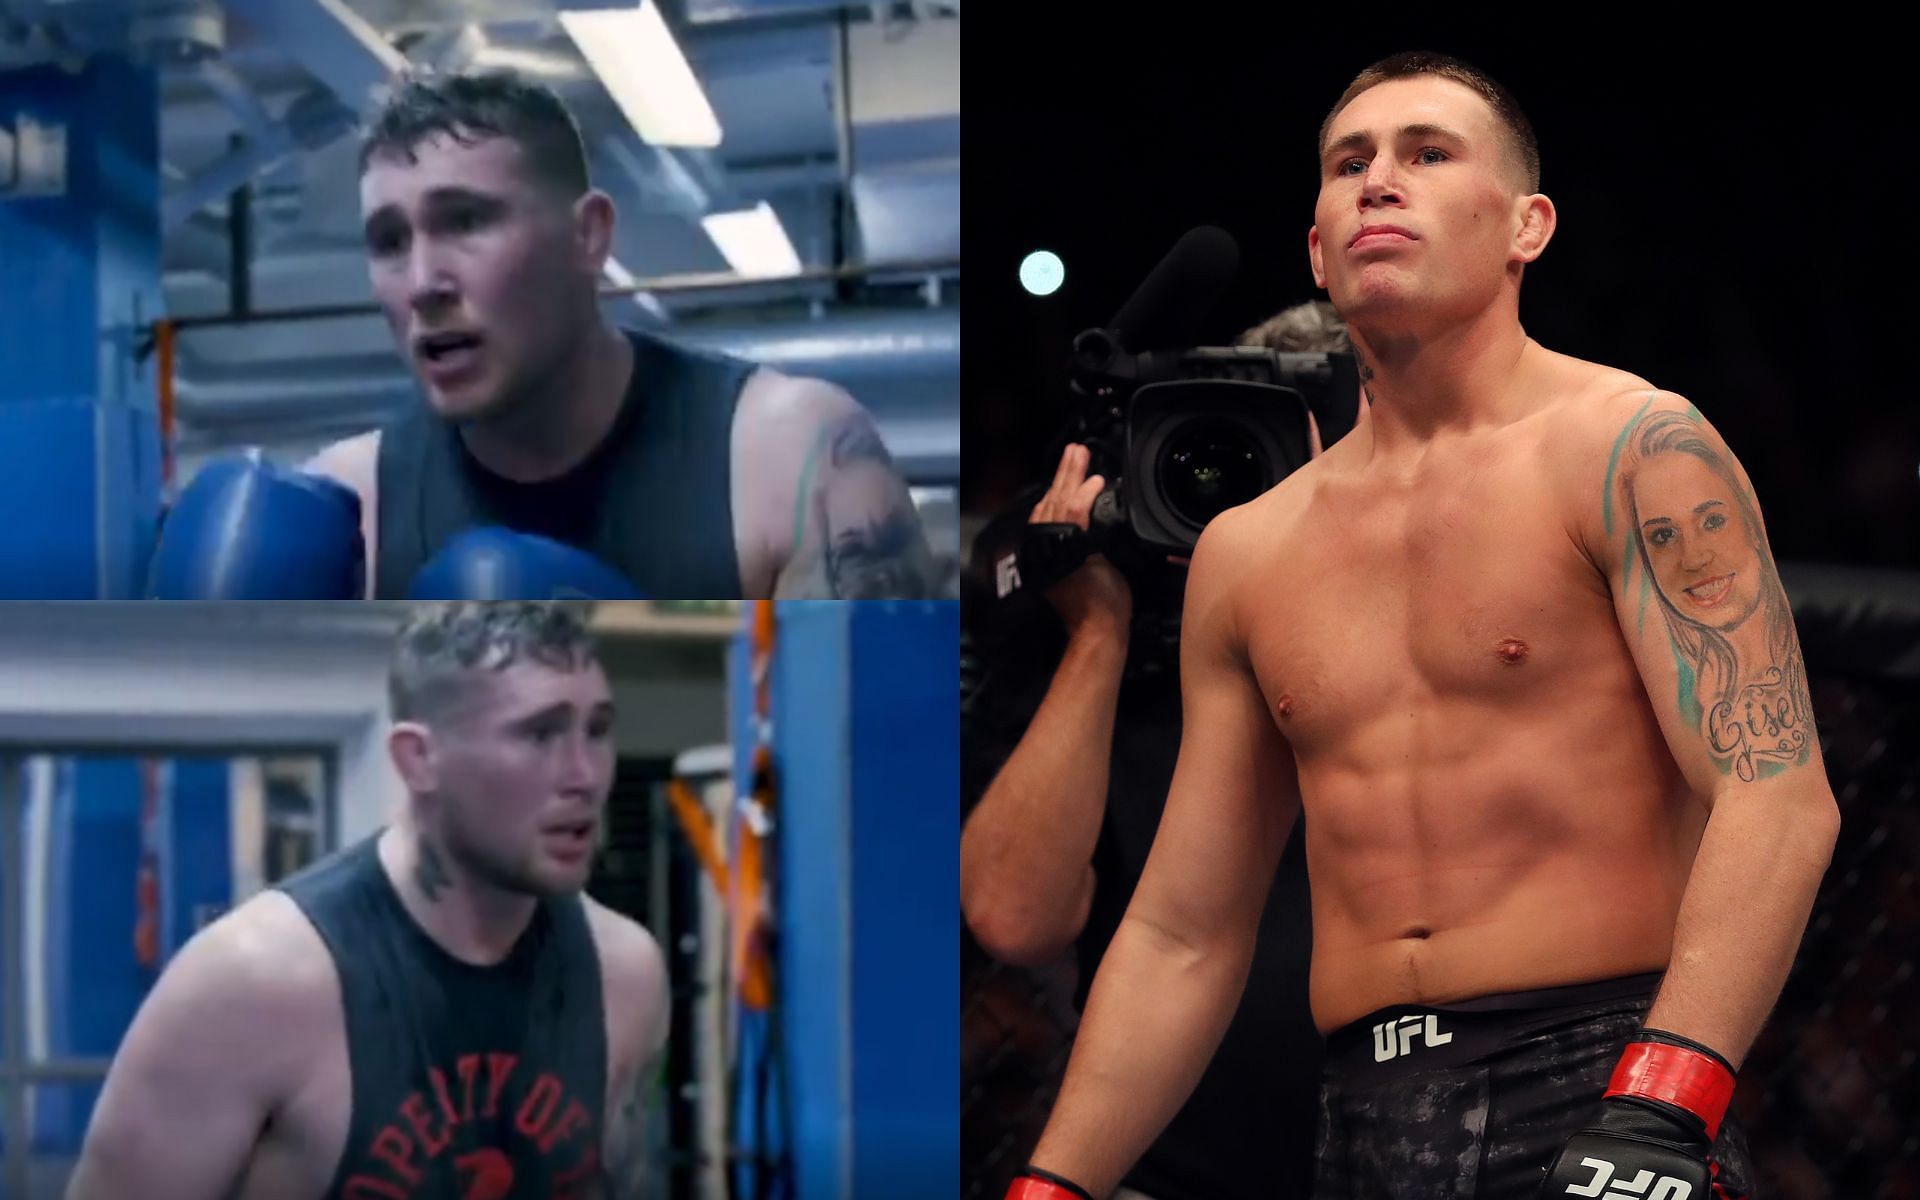 &lsquo;The Gorilla&rsquo; during a recent training session (Left), Darren Till (Right) [Image courtesy: @darrentill2.0 Instagram and Getty Images]